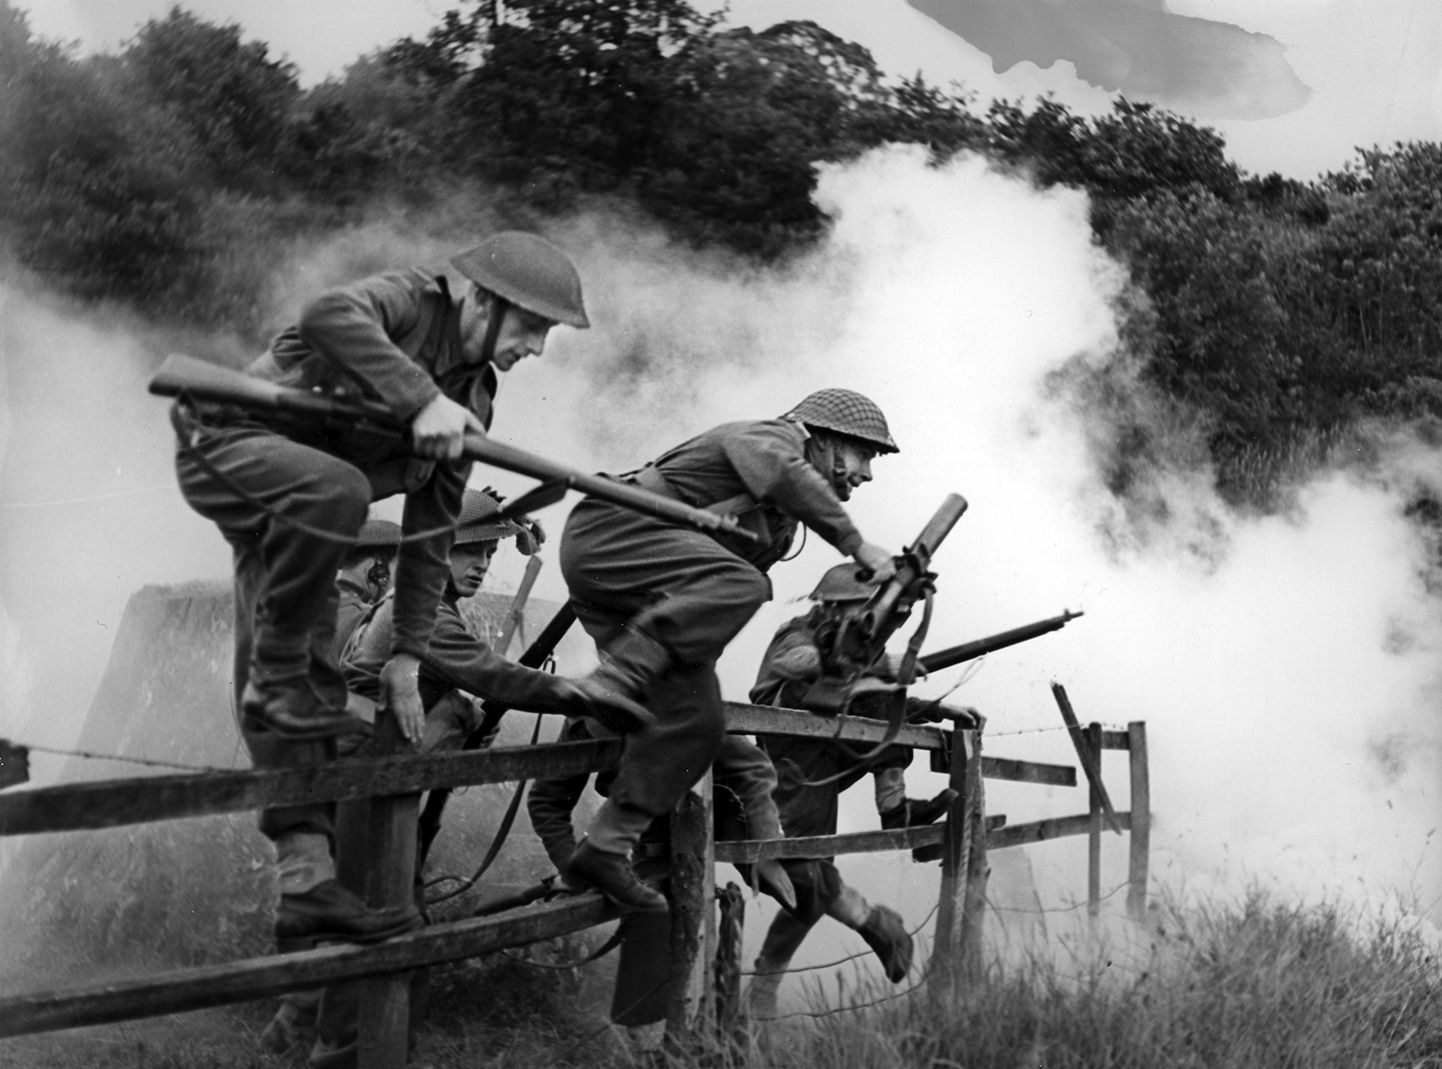 Equipped with British uniforms and weapons, Polish soldiers run an obstacle course at one of their training camps in Britain.